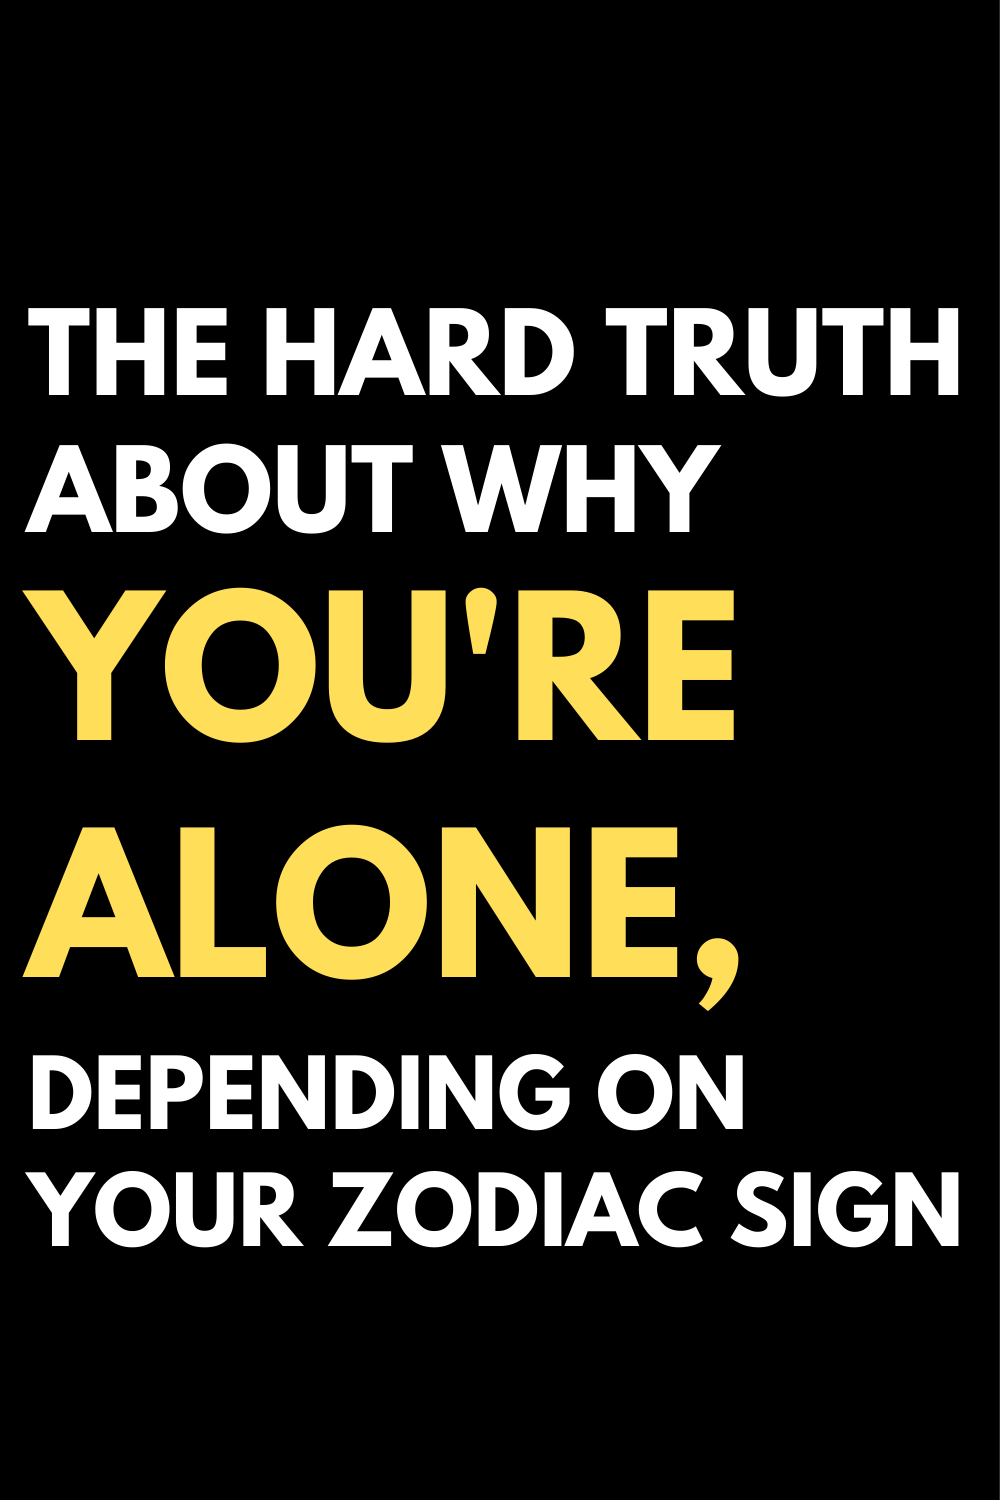 The hard truth about why you're alone, depending on your zodiac sign